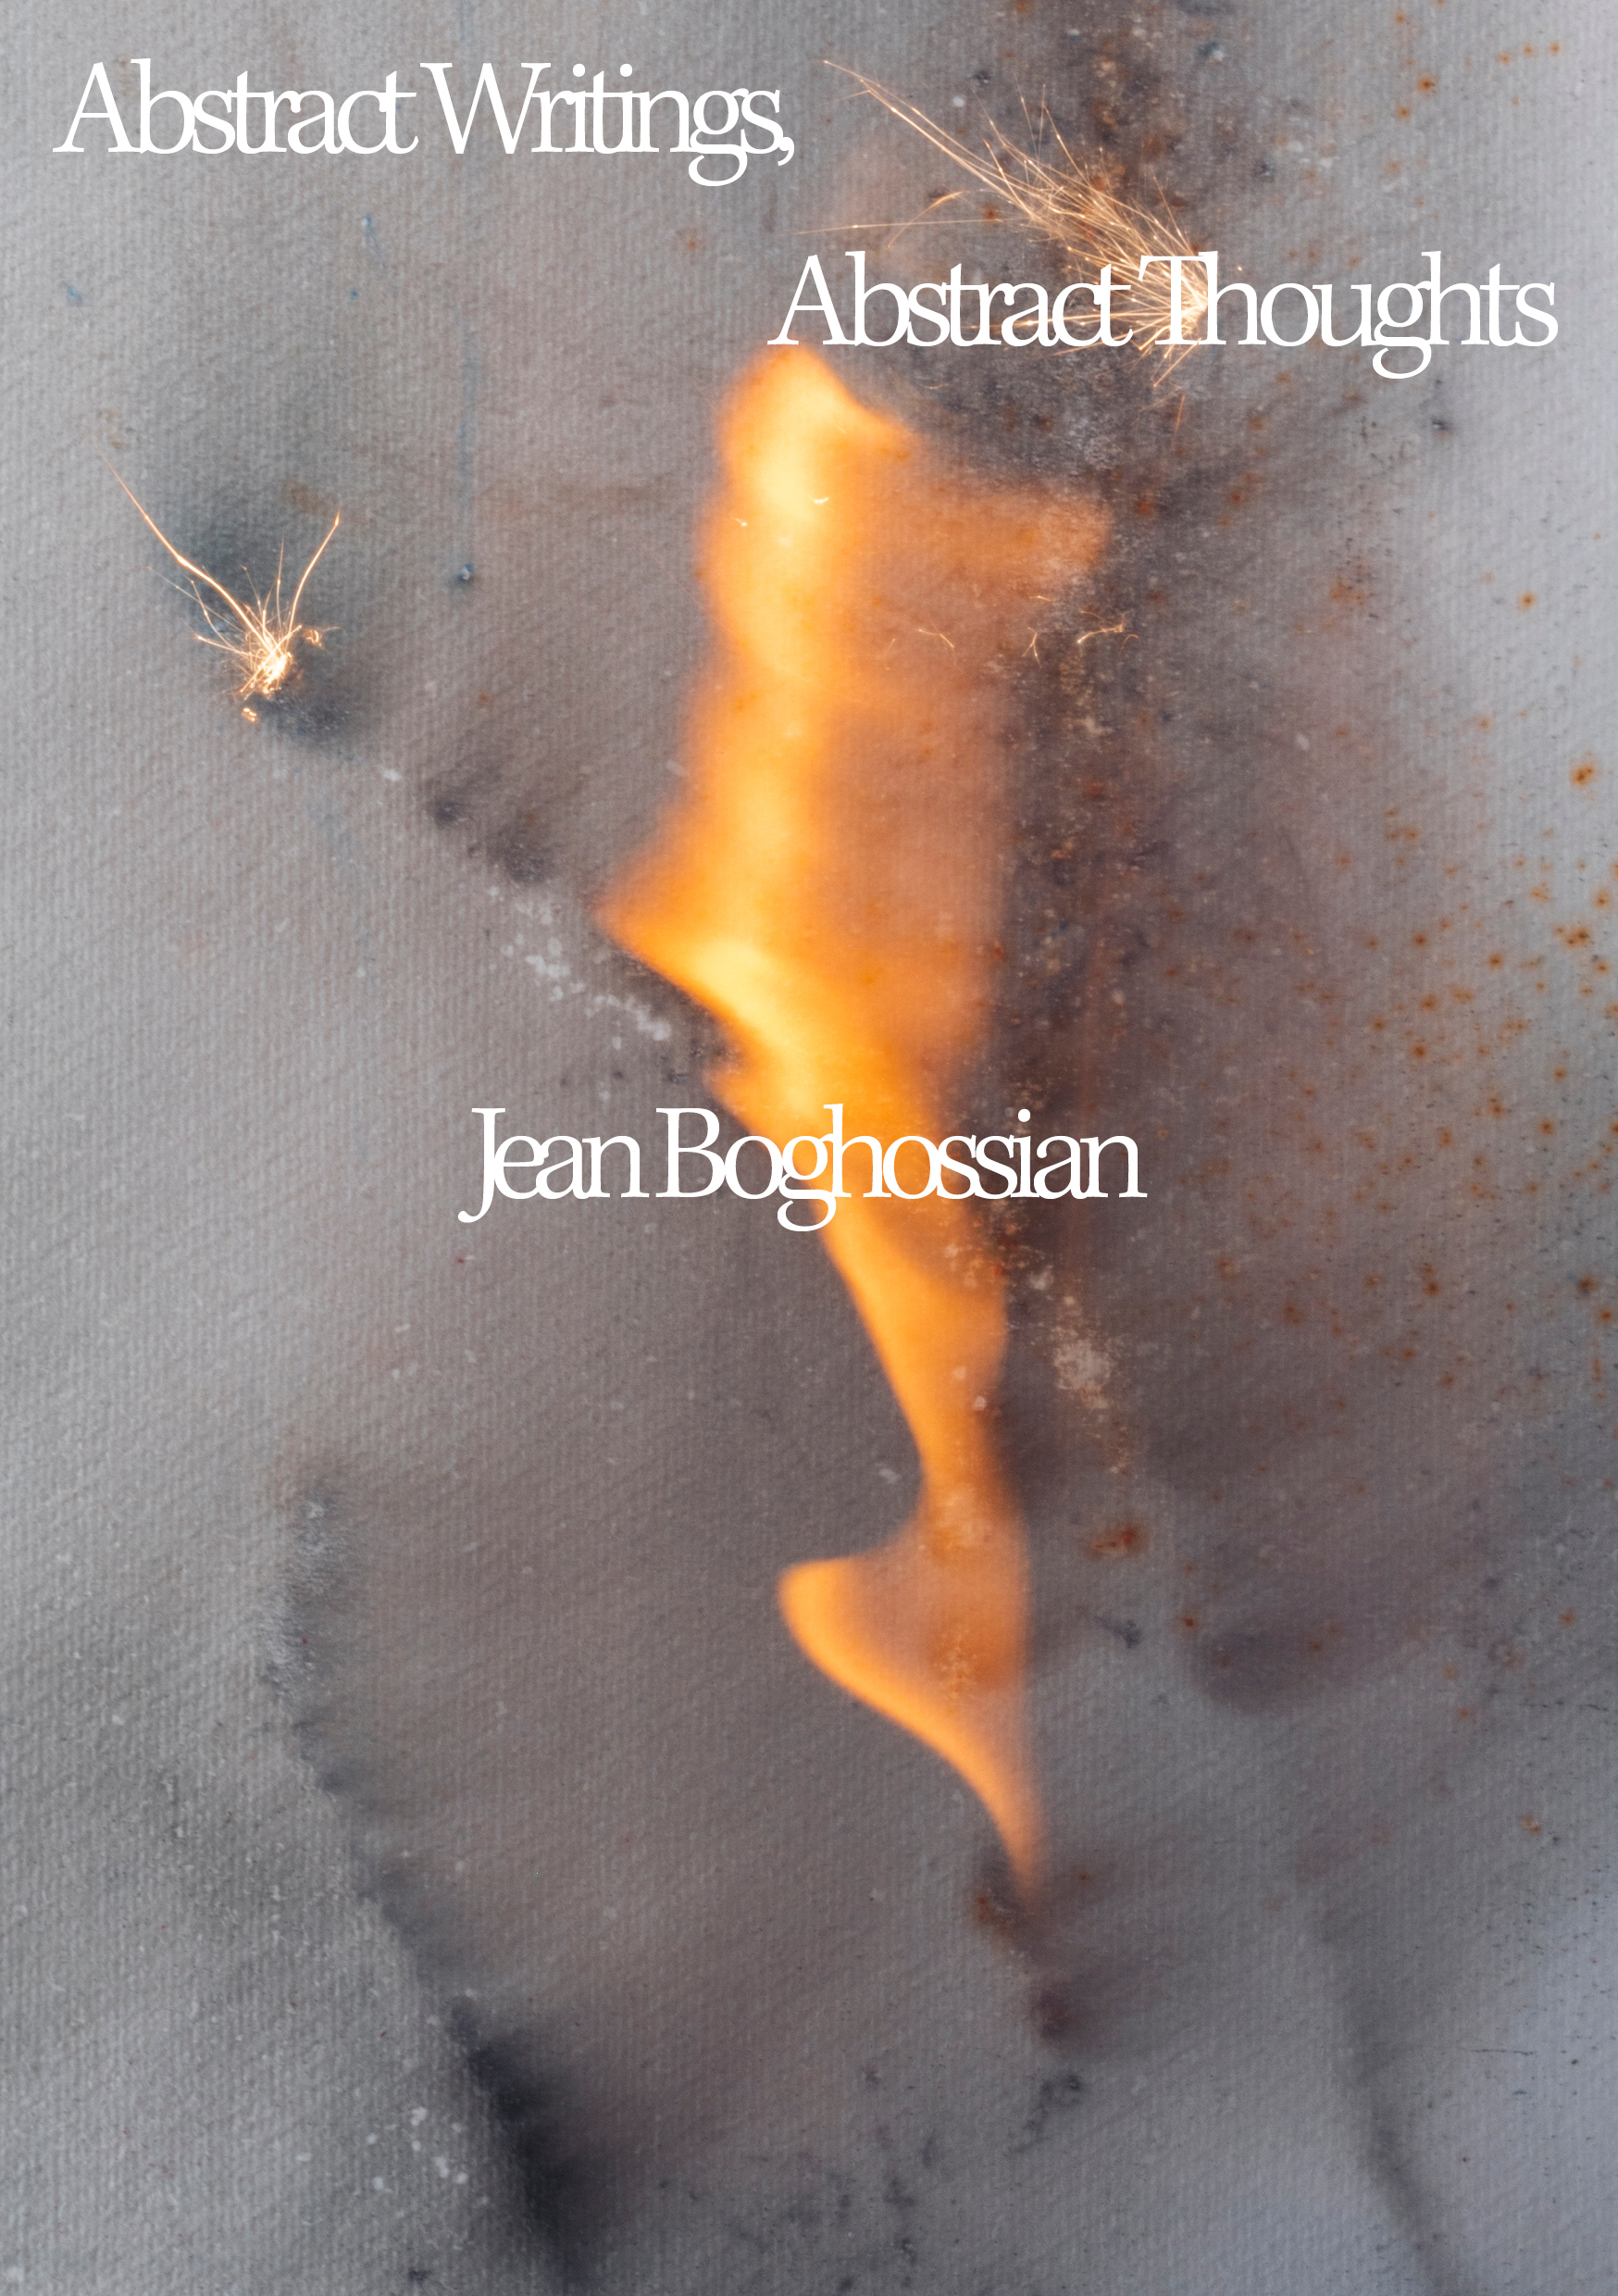 Abstract Writings, Abstract Thoughts. Jean Boghossian